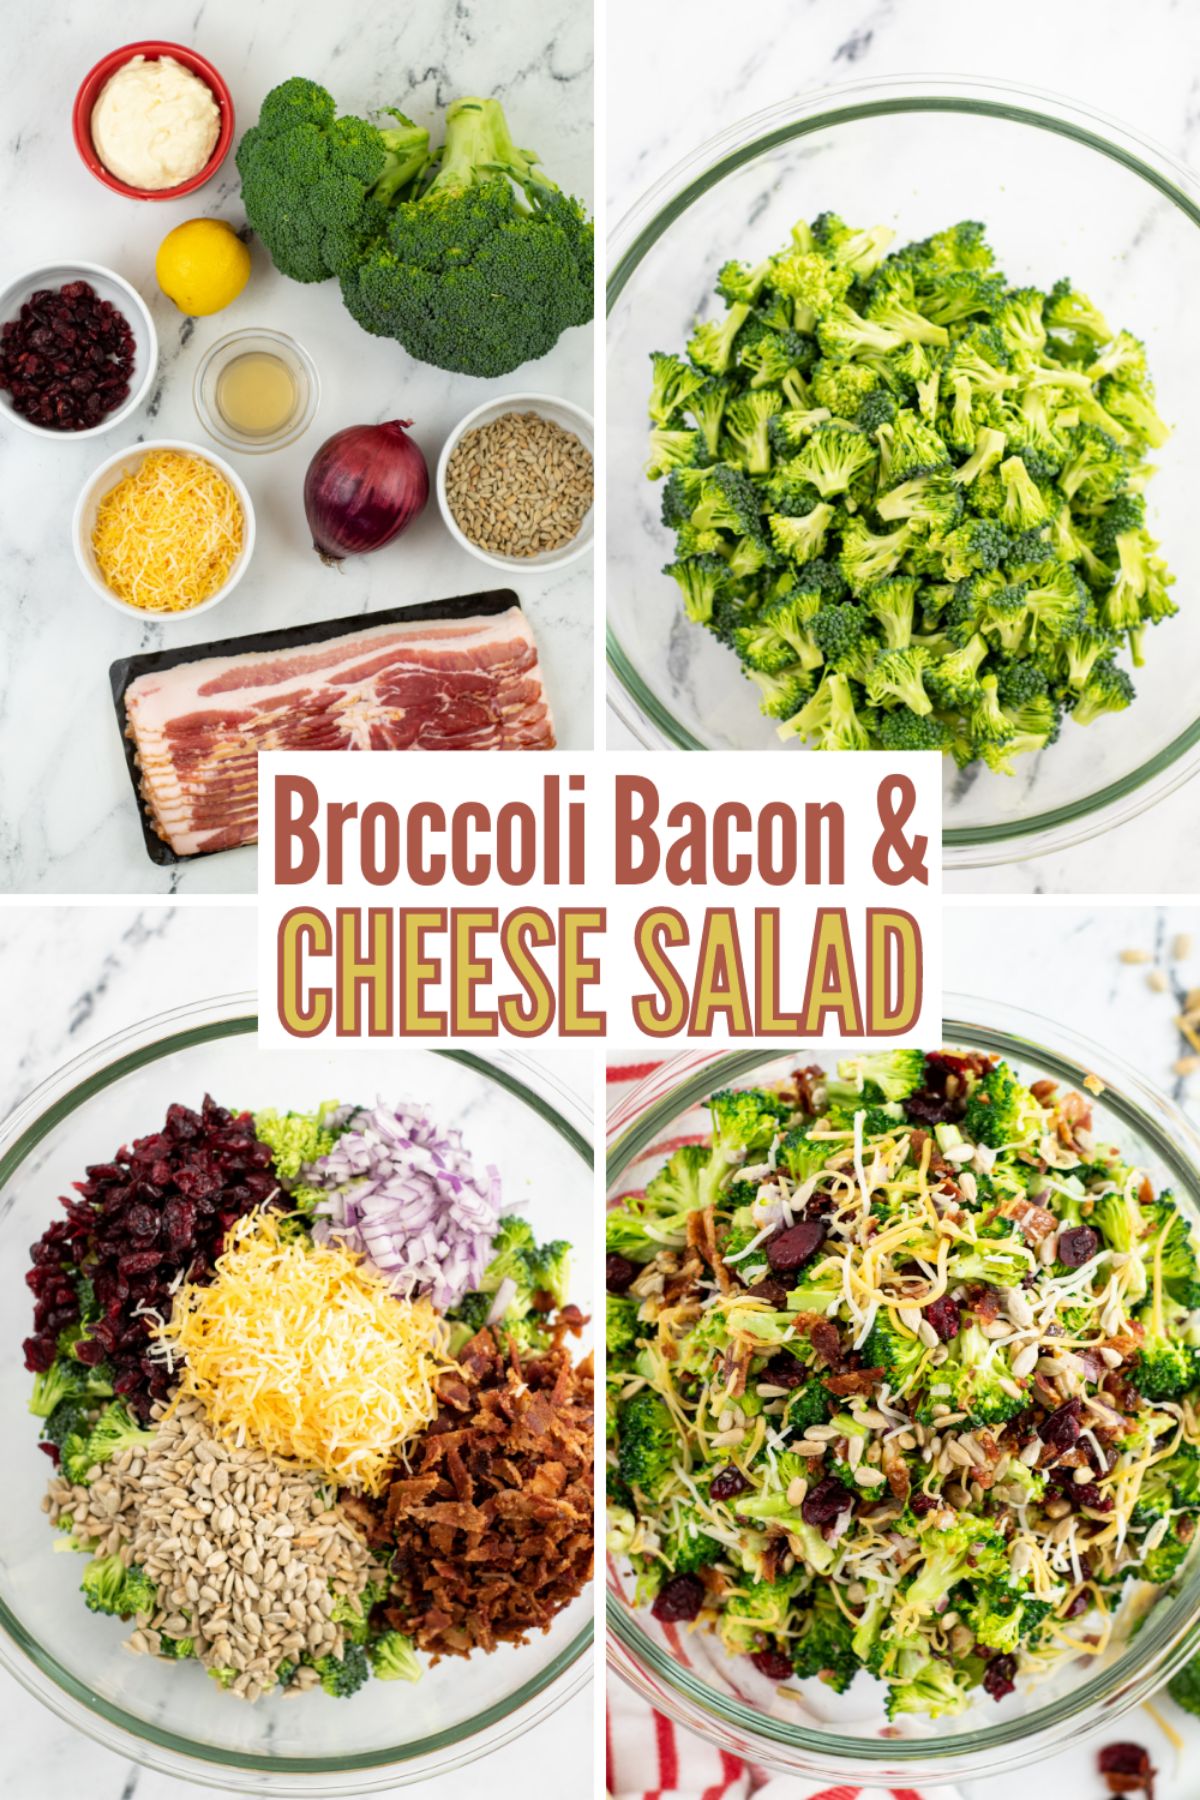 This Broccoli Bacon and Cheese Salad is anything but routine. With savory bacon and a tangy dressing, it’s perfect for any picnic or potluck. #broccolibaconandcheesesalad #salad #broccolisalad #saladrecipes via @wondermomwannab